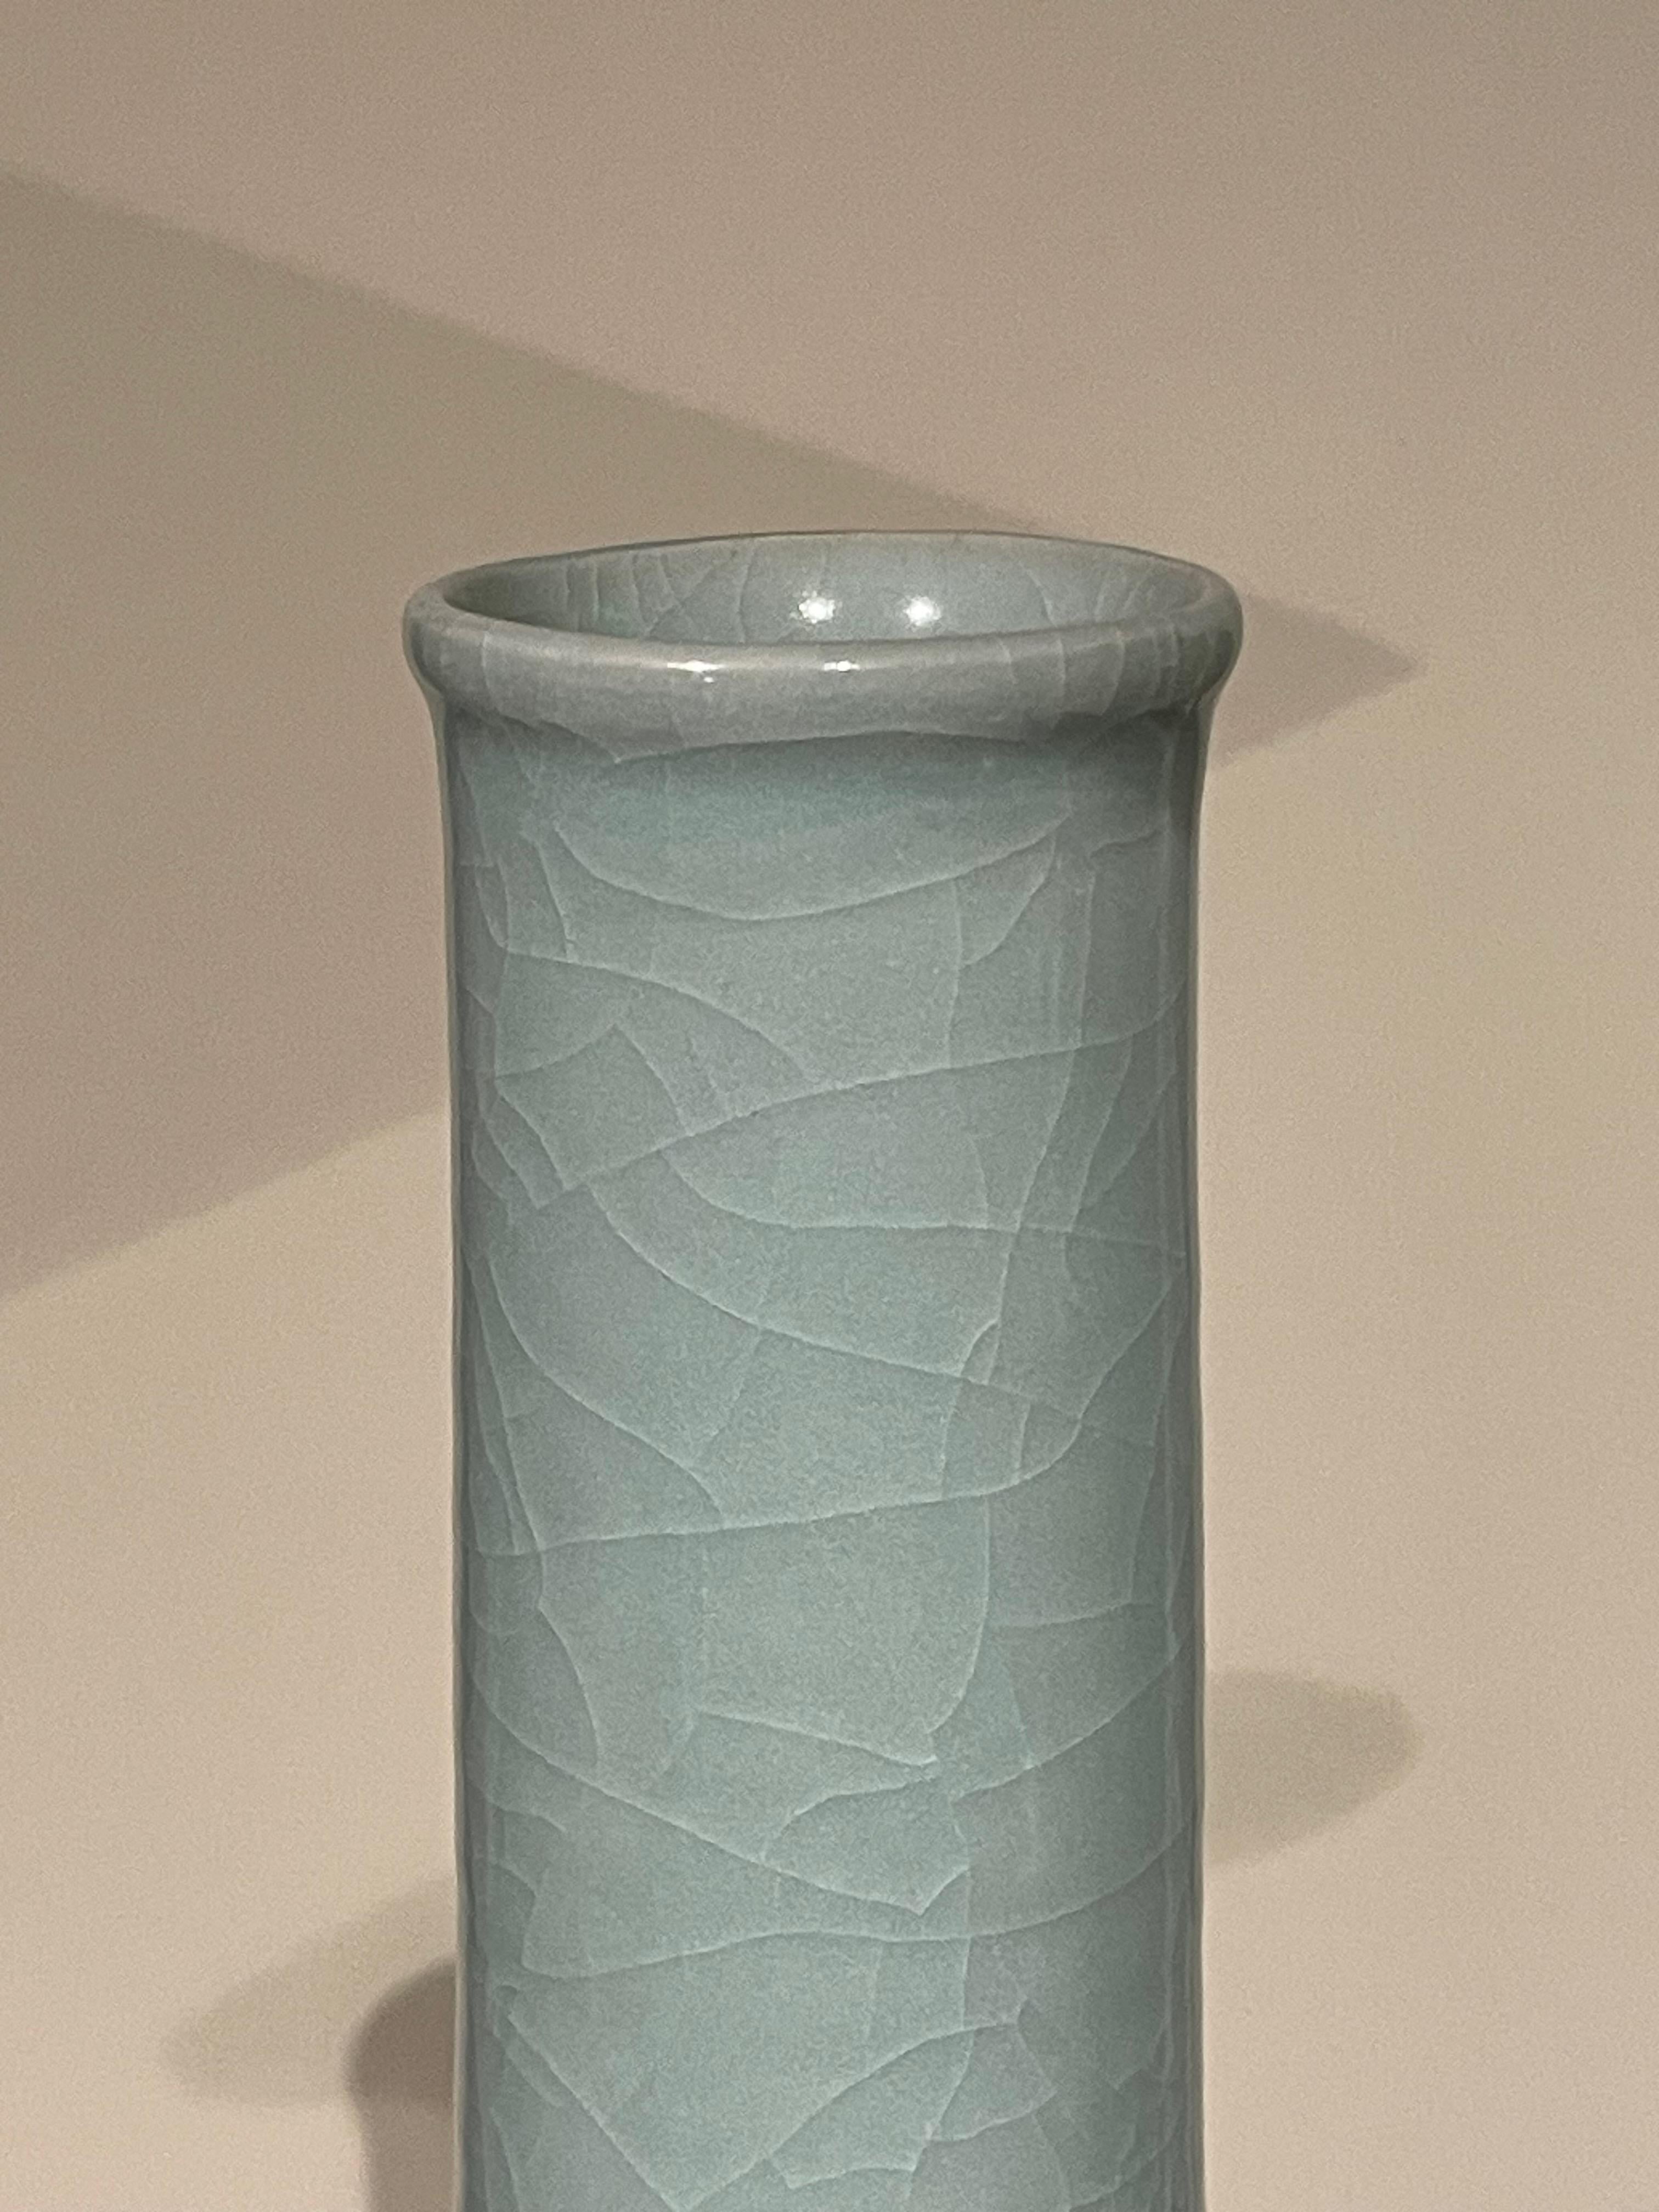 Contemporary Chinese pale turquoise vase.
Funnel neck design.
Large collection available with varying sizes and shapes.
